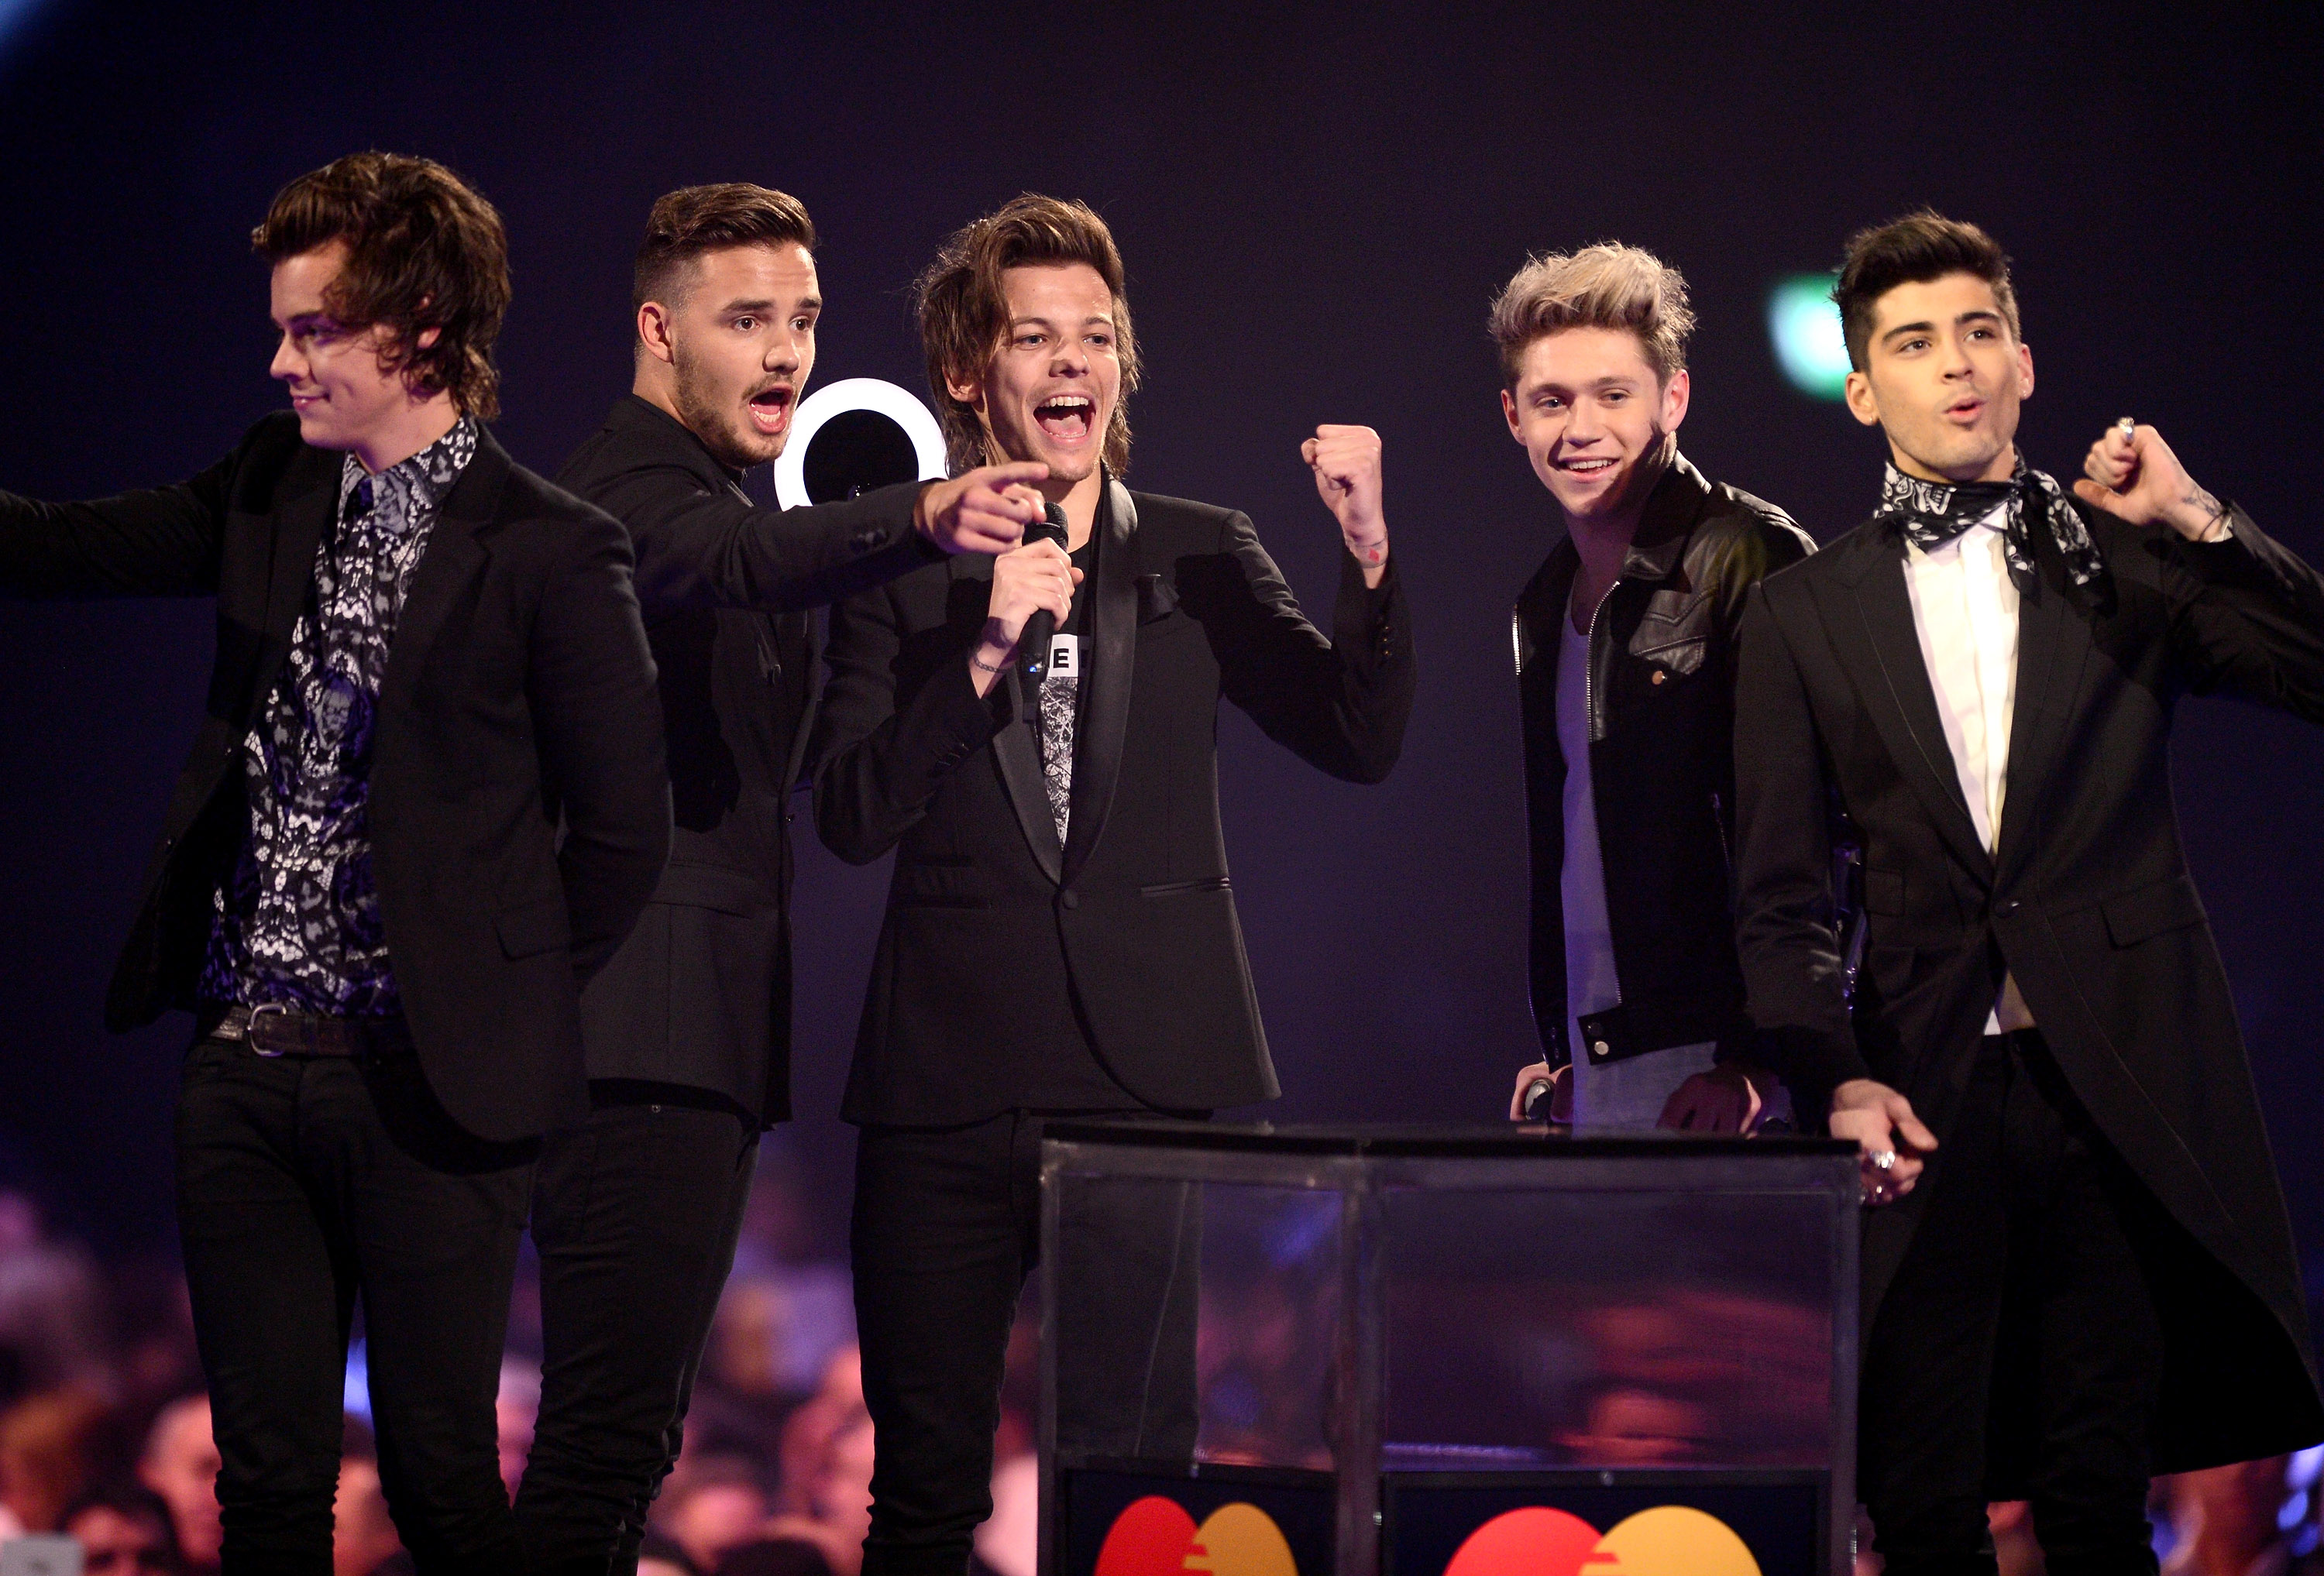 Harry Styles, Liam Payne, Louis Tomlinson, Niall Horan and Zayn Malik from One Direction receive the award for Best Video at the BRIT Awards 2014 at 02 Arena on February 19, 2014 in London, England. (Karwai Tang&mdash;WireImage)